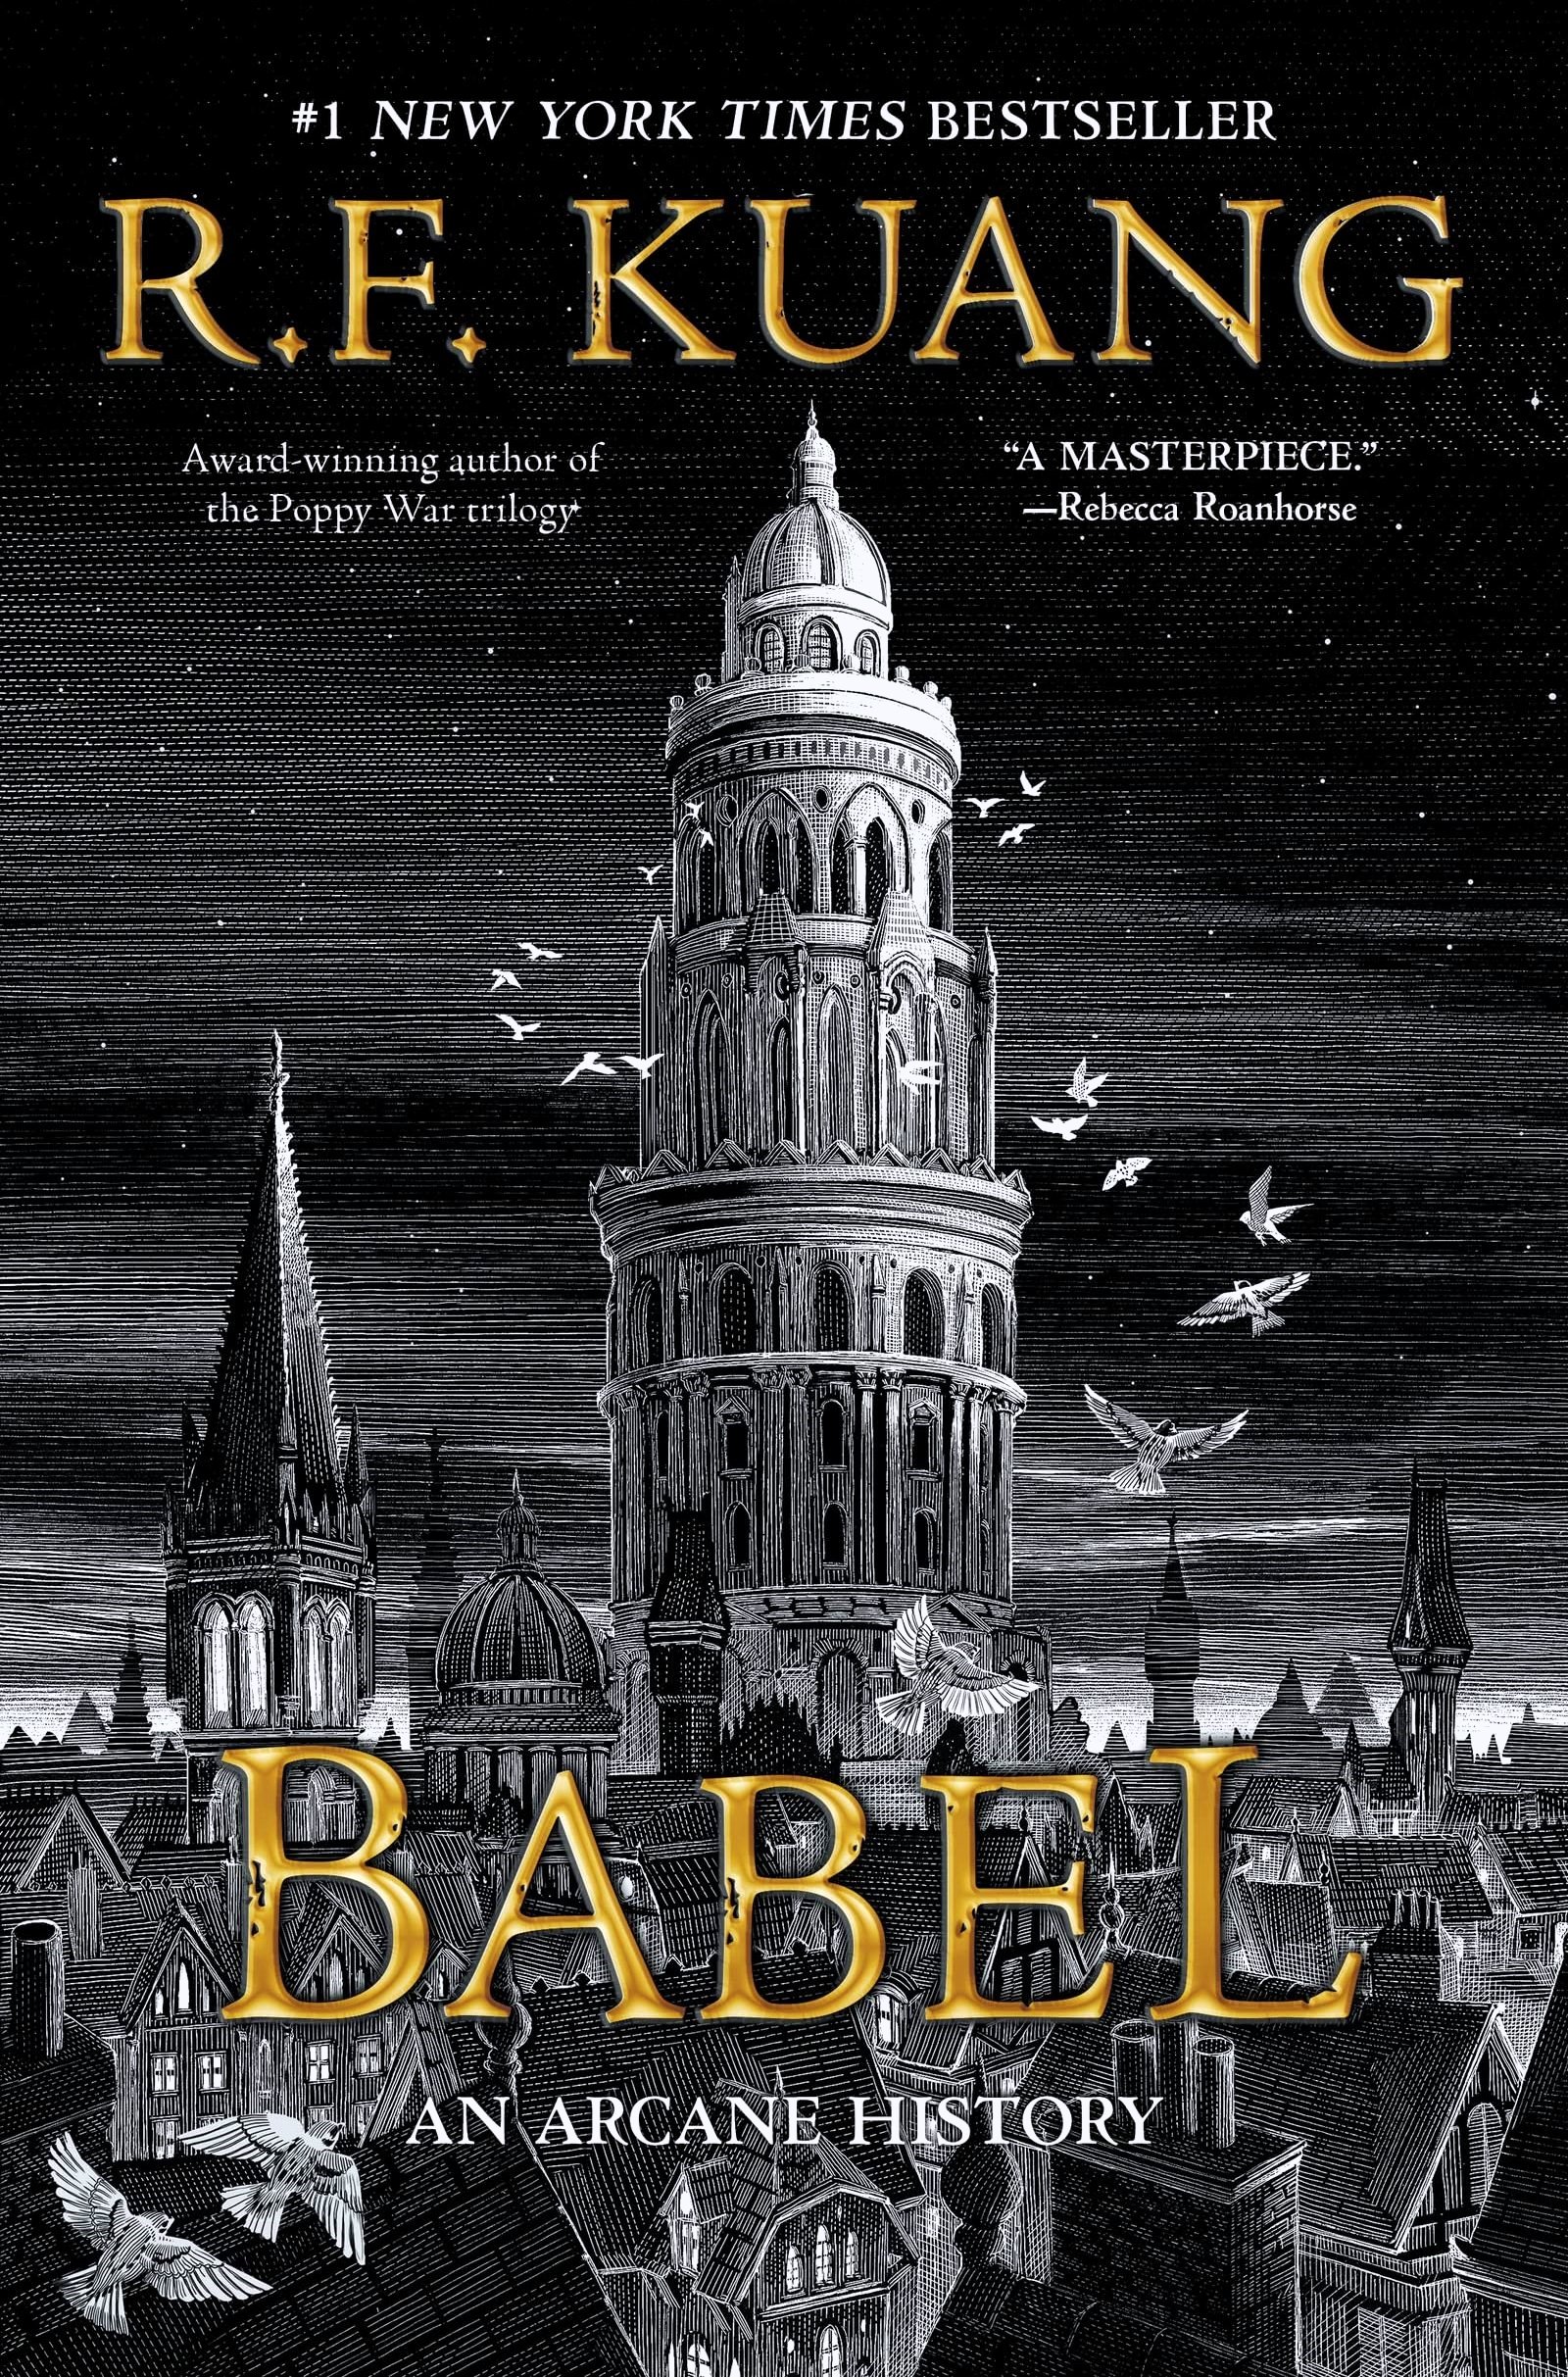 Book review: Babel by R F Kuang